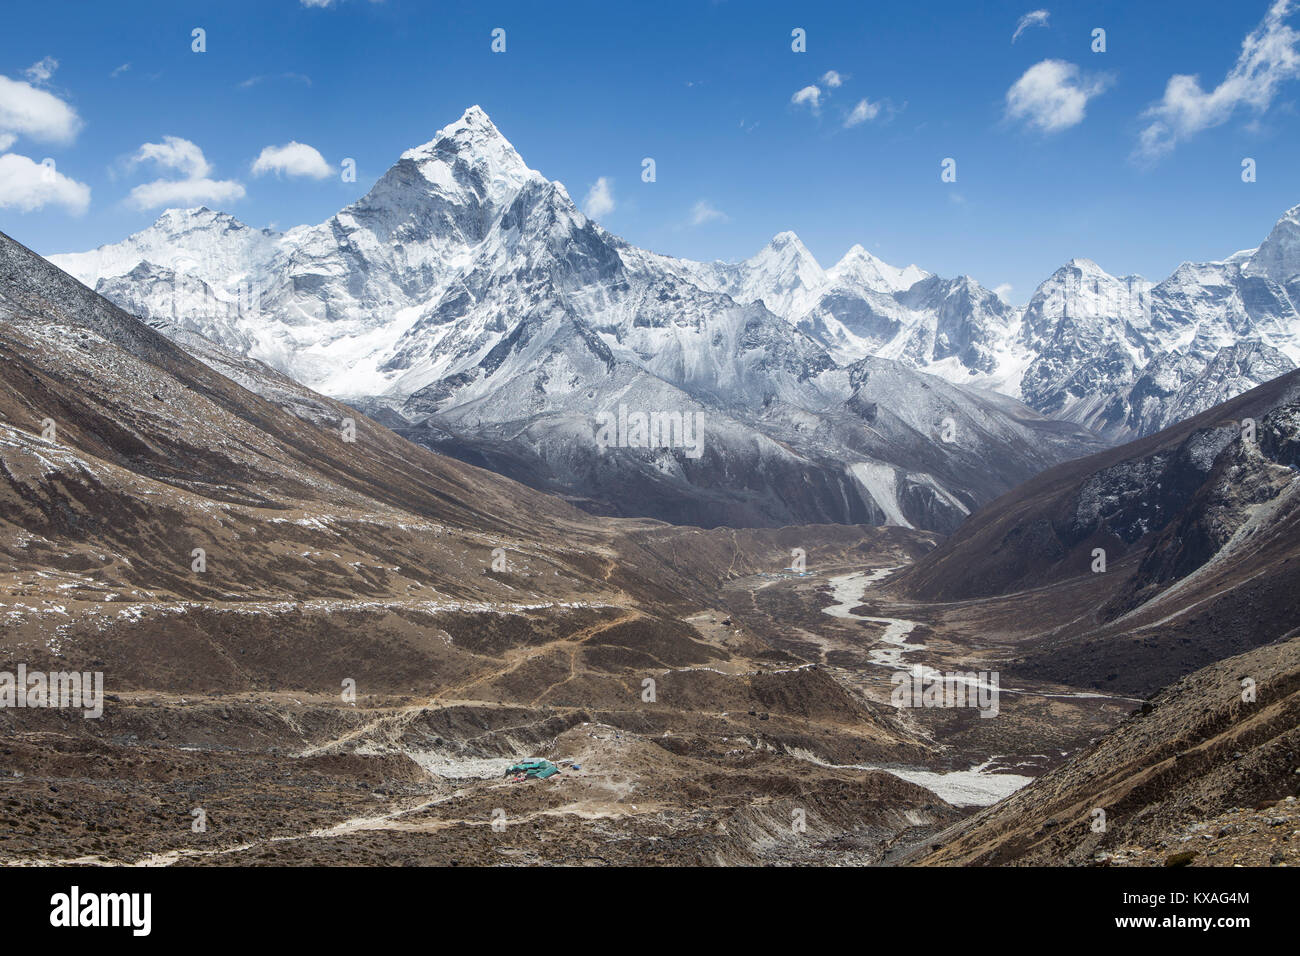 Helicopter view over the upper Khumbu valley with the village of Pheriche and the mountain Thamserku. Stock Photo